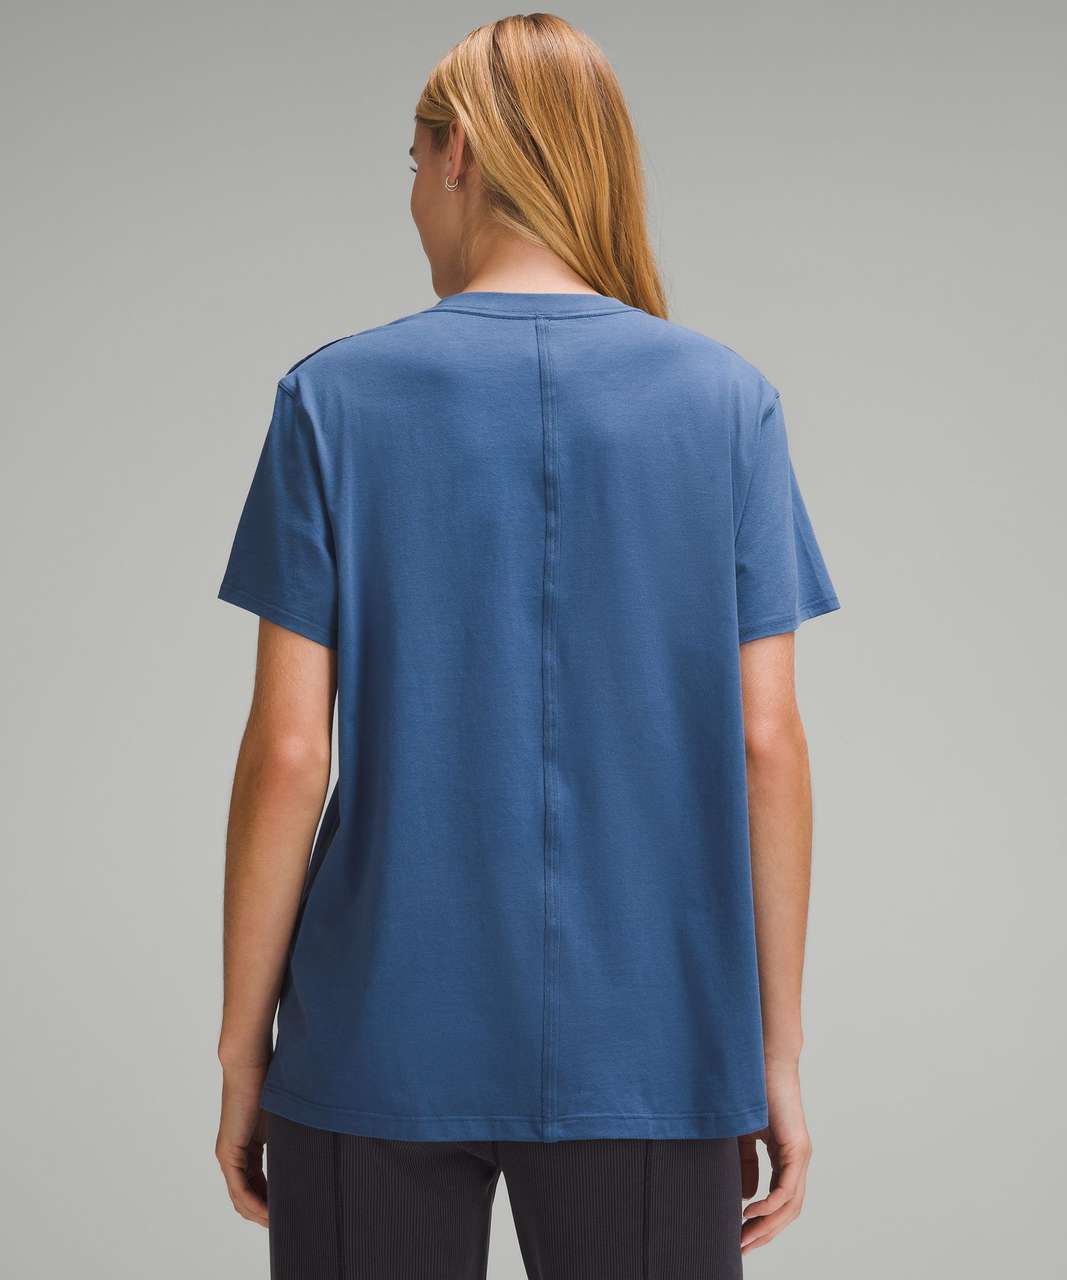 Lululemon All Yours Cotton T-Shirt - Pitch Blue